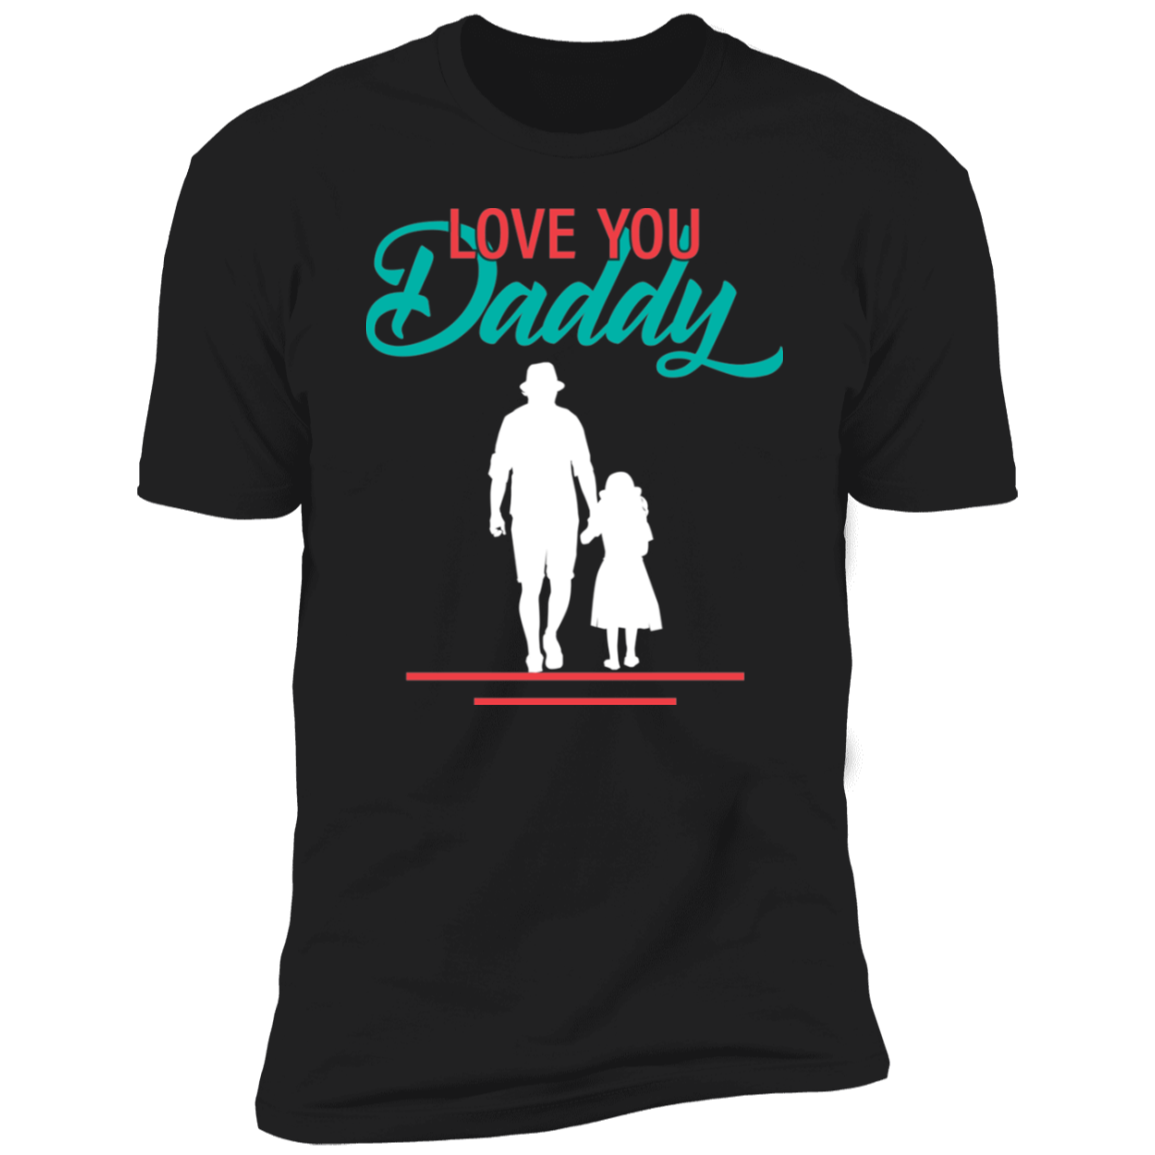 LOVE YOU DADDY-Short Sleeve T-Shirt